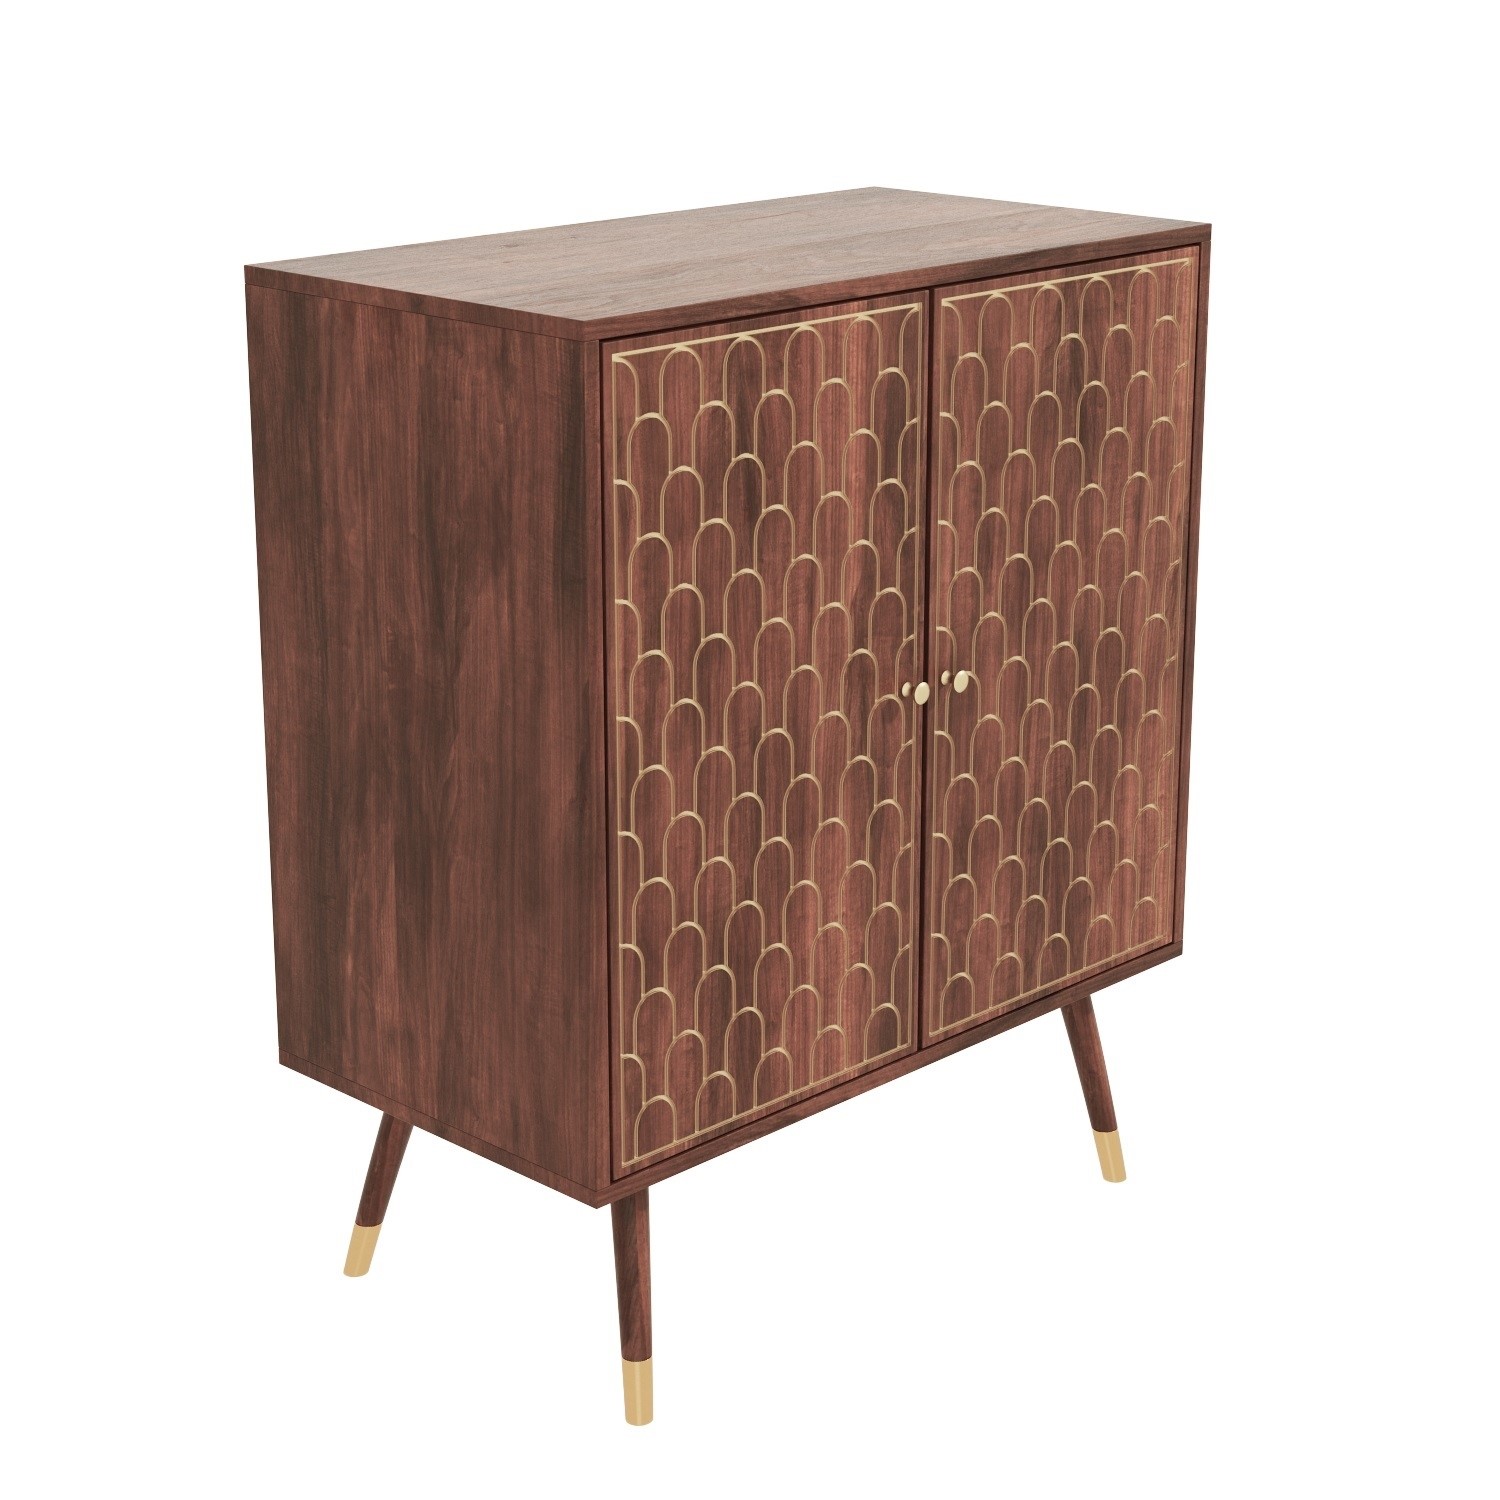 Photo of Small sideboard in solid mango wood with gold inlay - dejan